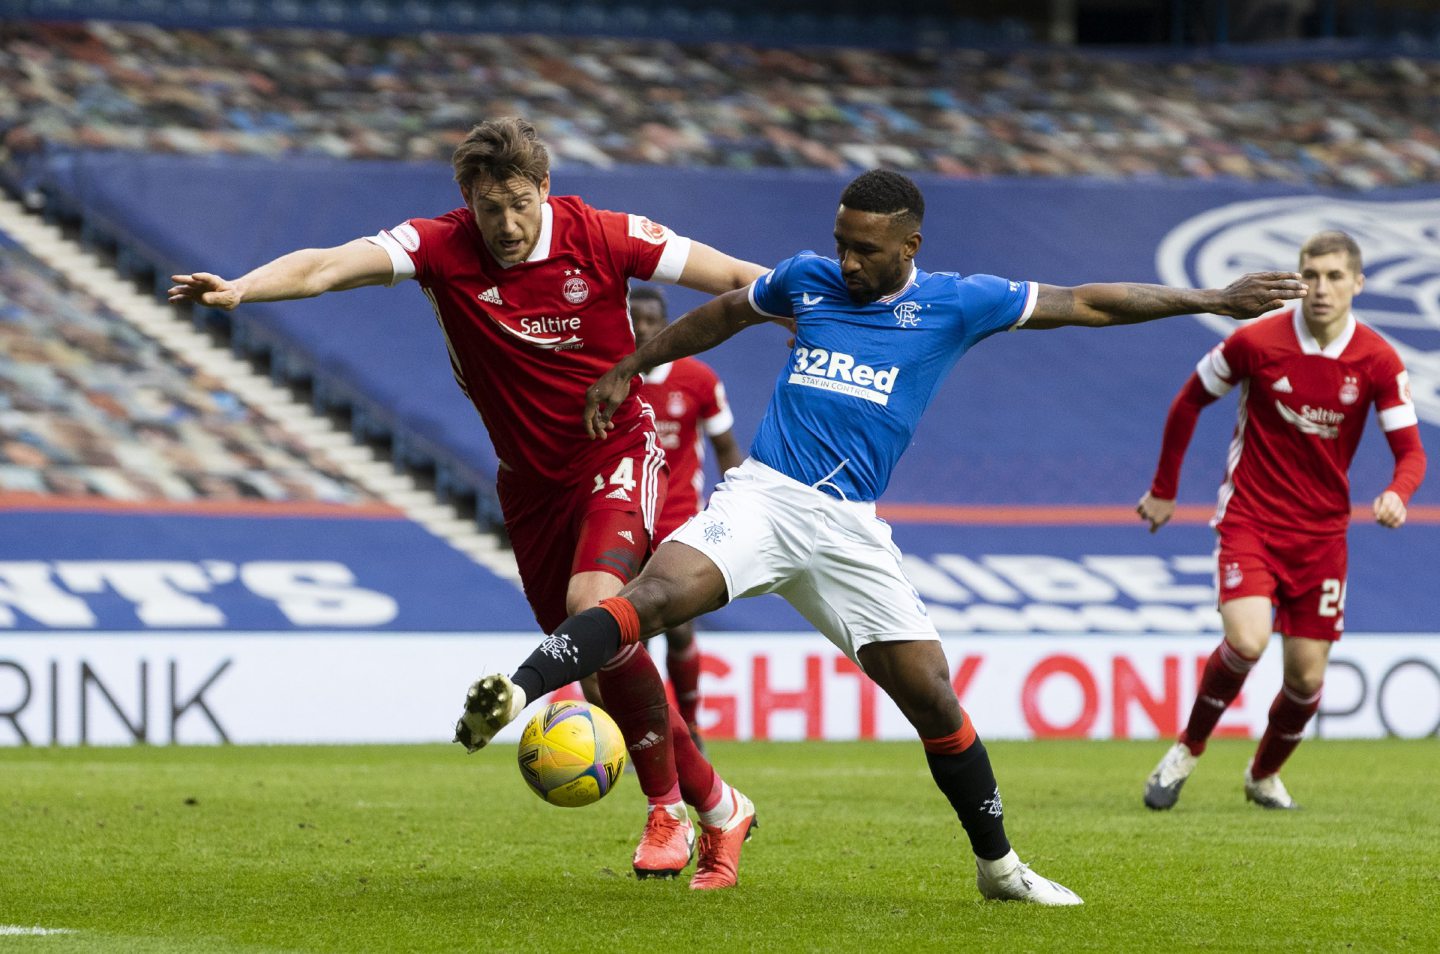 Aberdeen's Ash Taylor tangles with Rangers' Jermain Defoe at Ibrox on November 22.